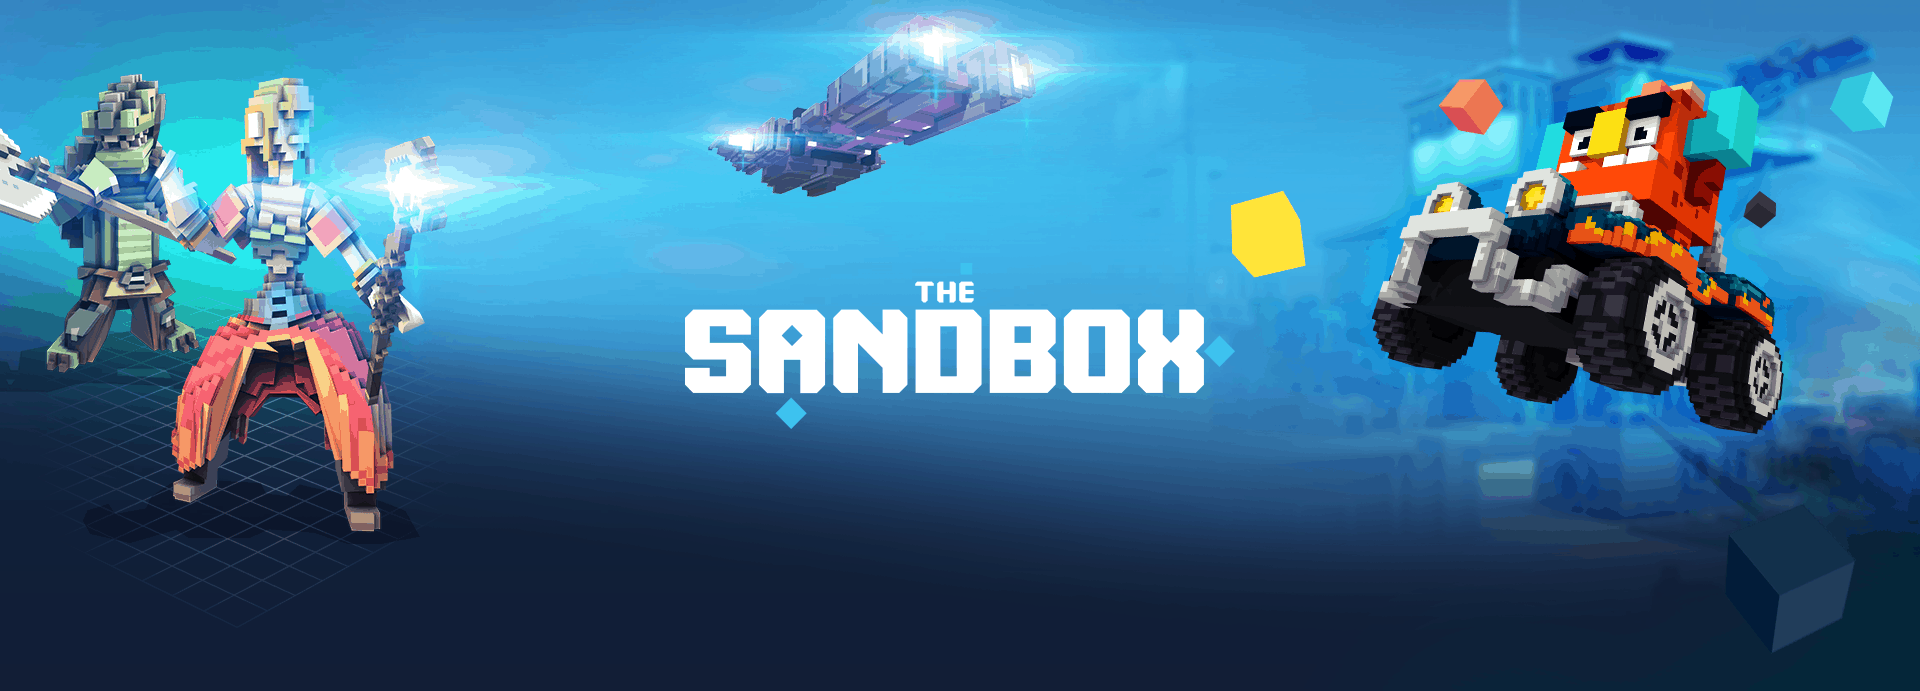 Sandbox AnimocaBrands BlockchainGames Crypto Gaming Investment Boosts Animoca Brands’ Vision for Empowering Makers to Create and Publish Digitally Owned Content in Upcoming Blockchain-Powered Version of its Successful Gaming Platform